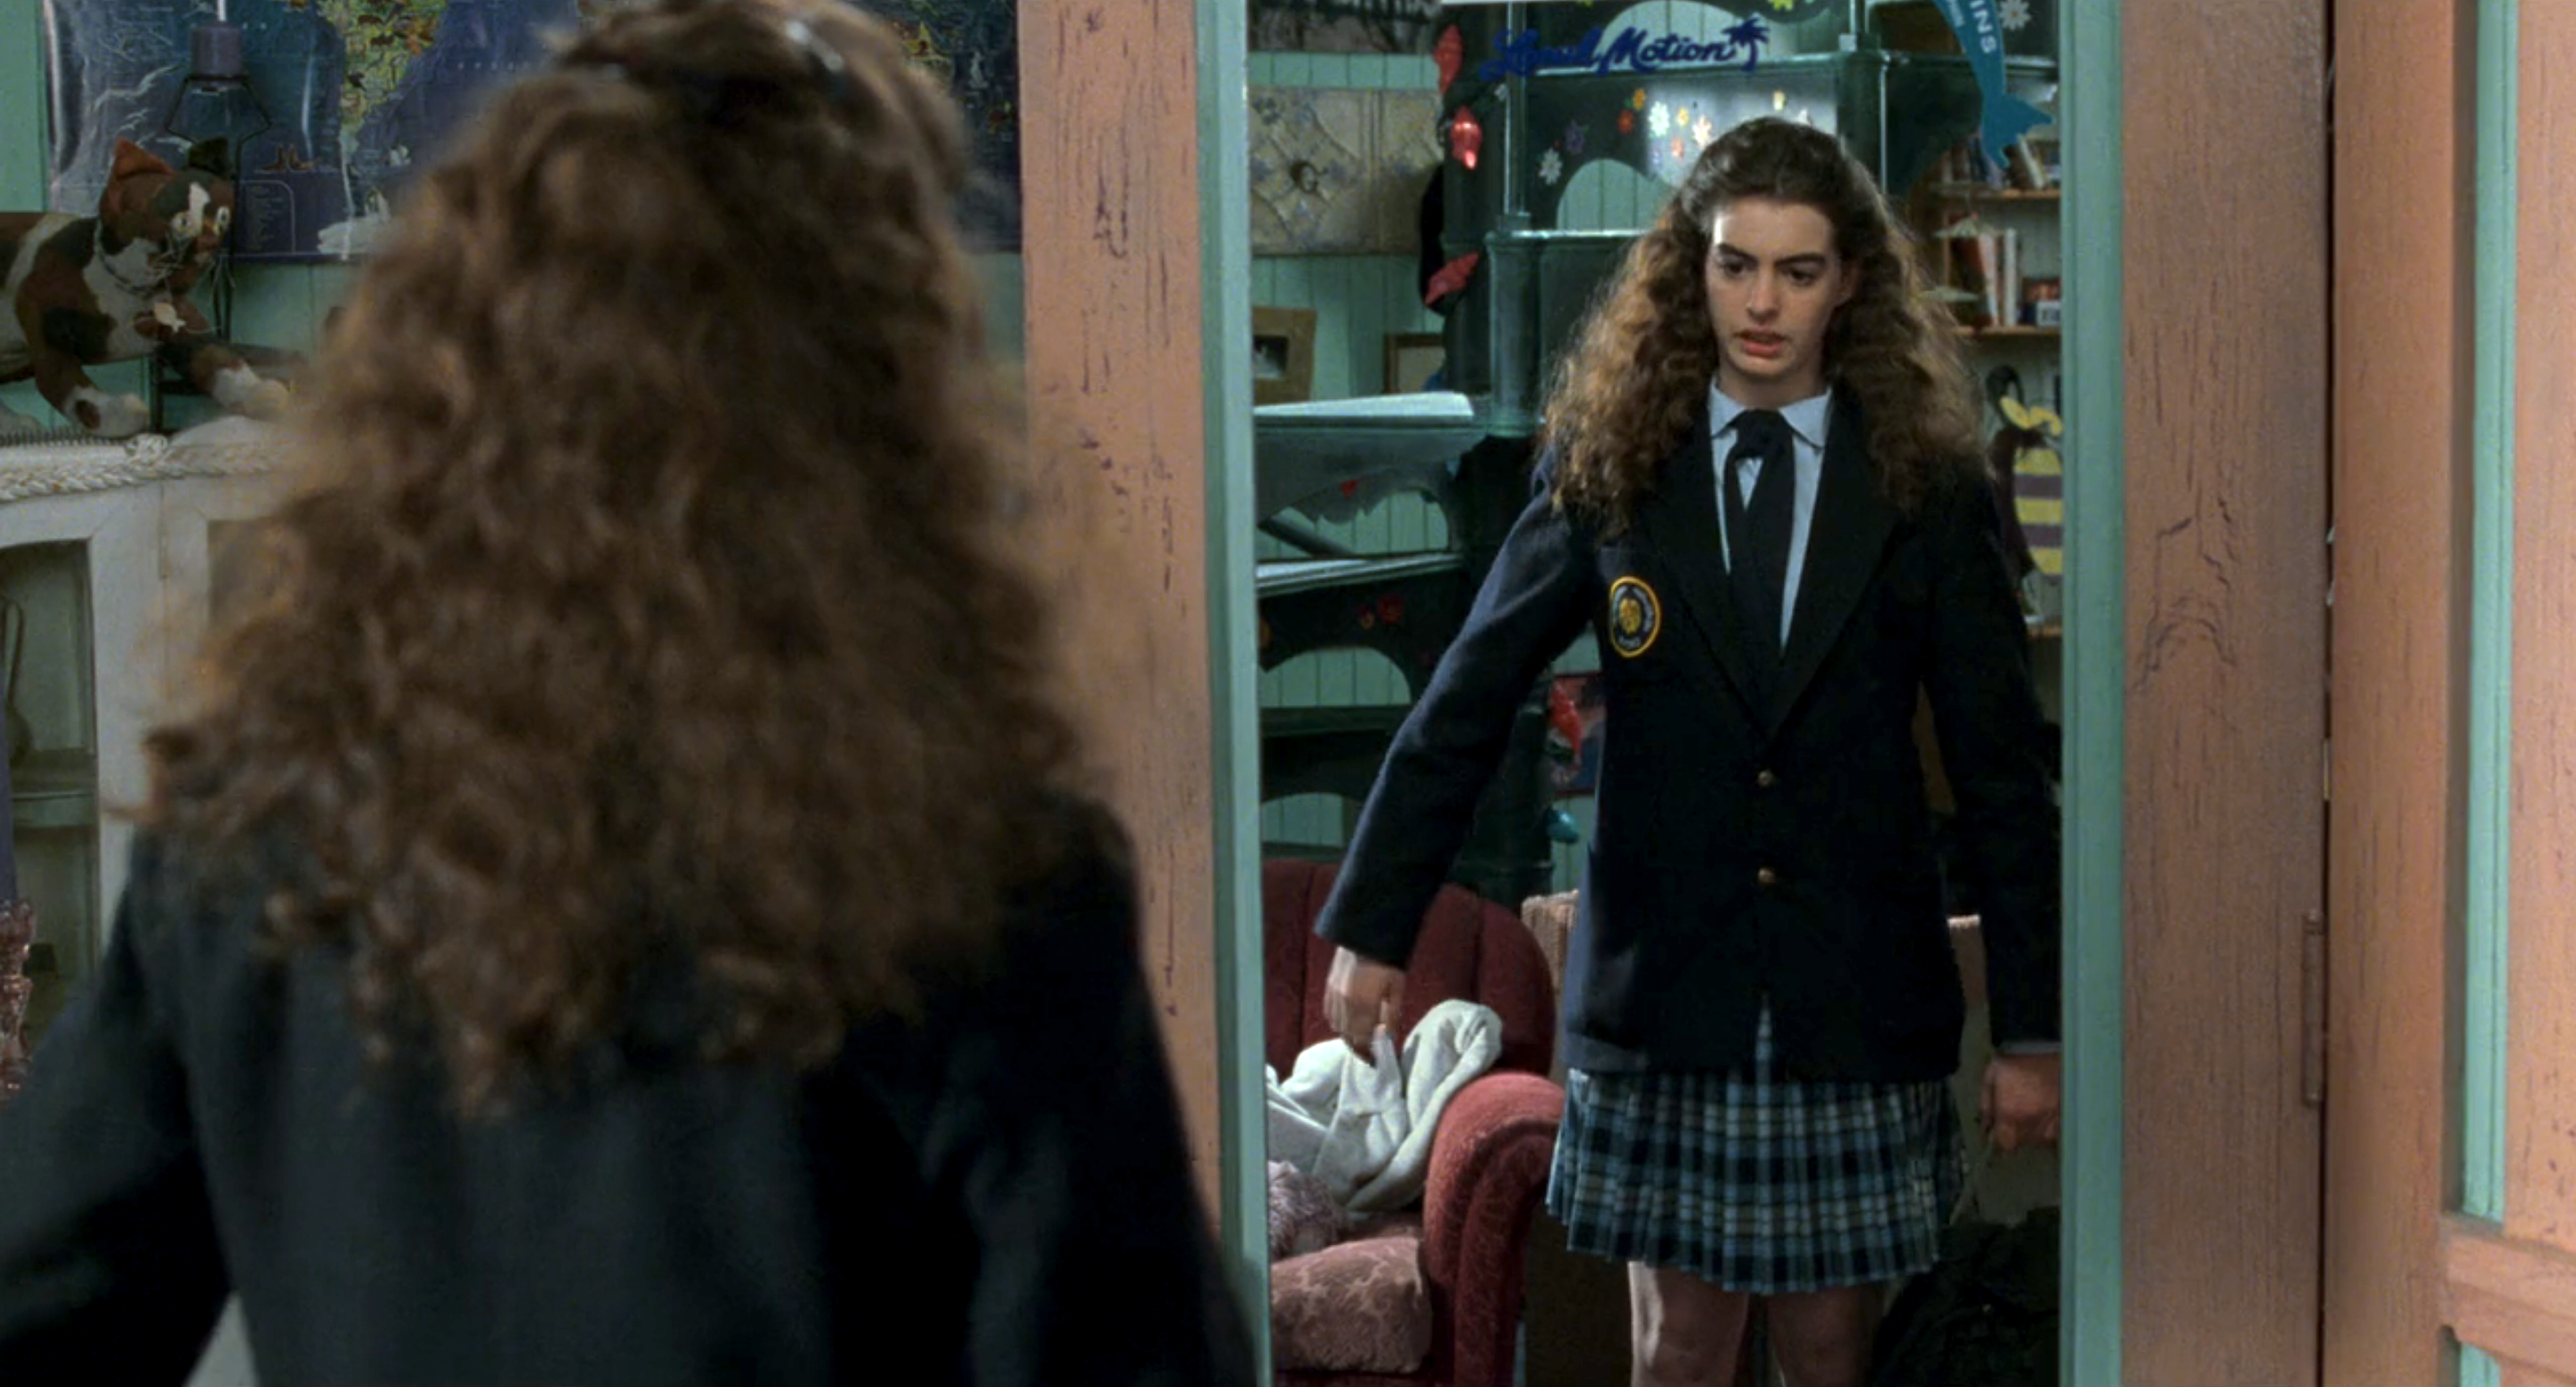 Screenshot from &quot;The Princess Diaries&quot;